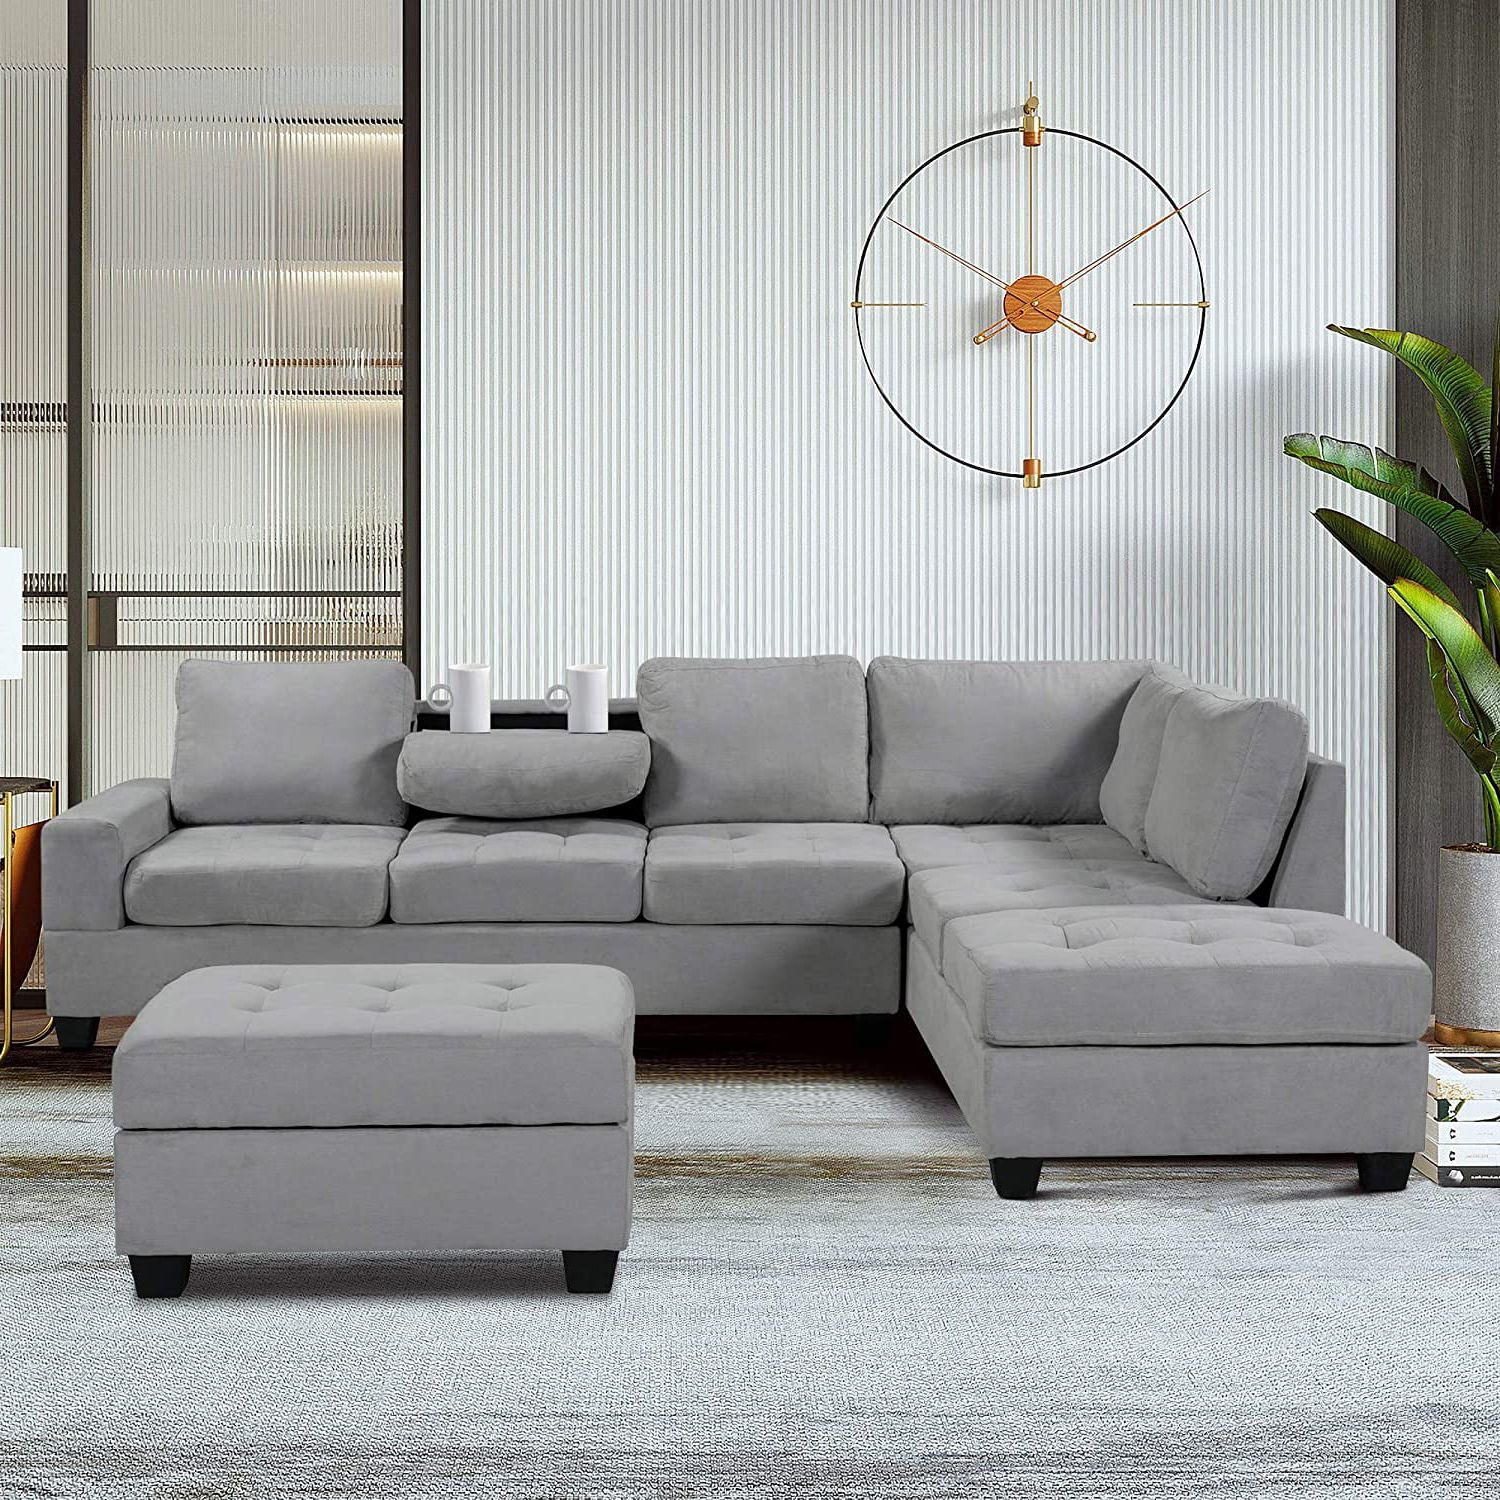 3 Piece Convertible Sectional Sofa L Shaped Couch With Reversible Pertaining To Sofas With Ottomans (View 15 of 20)